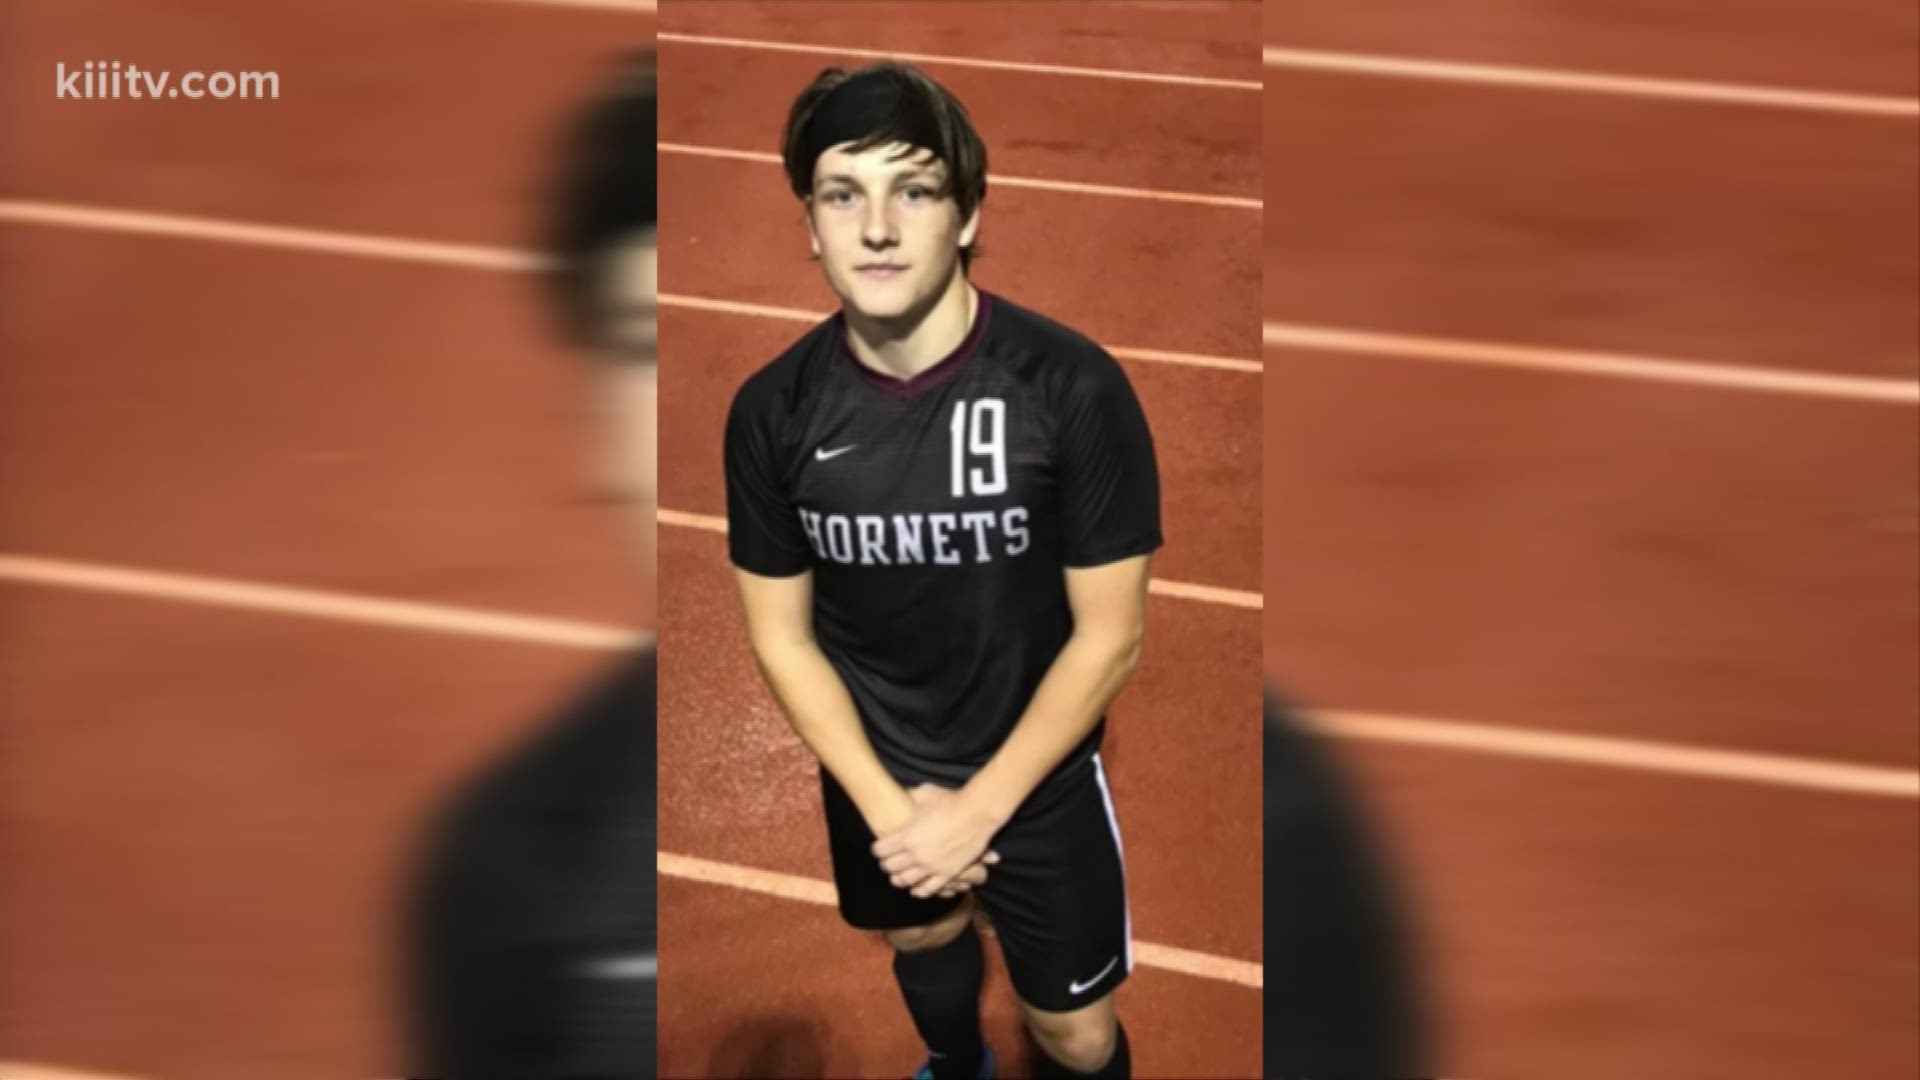 This week's 3News Athlete of the Week is Flour Bluff's Chance Pittman.